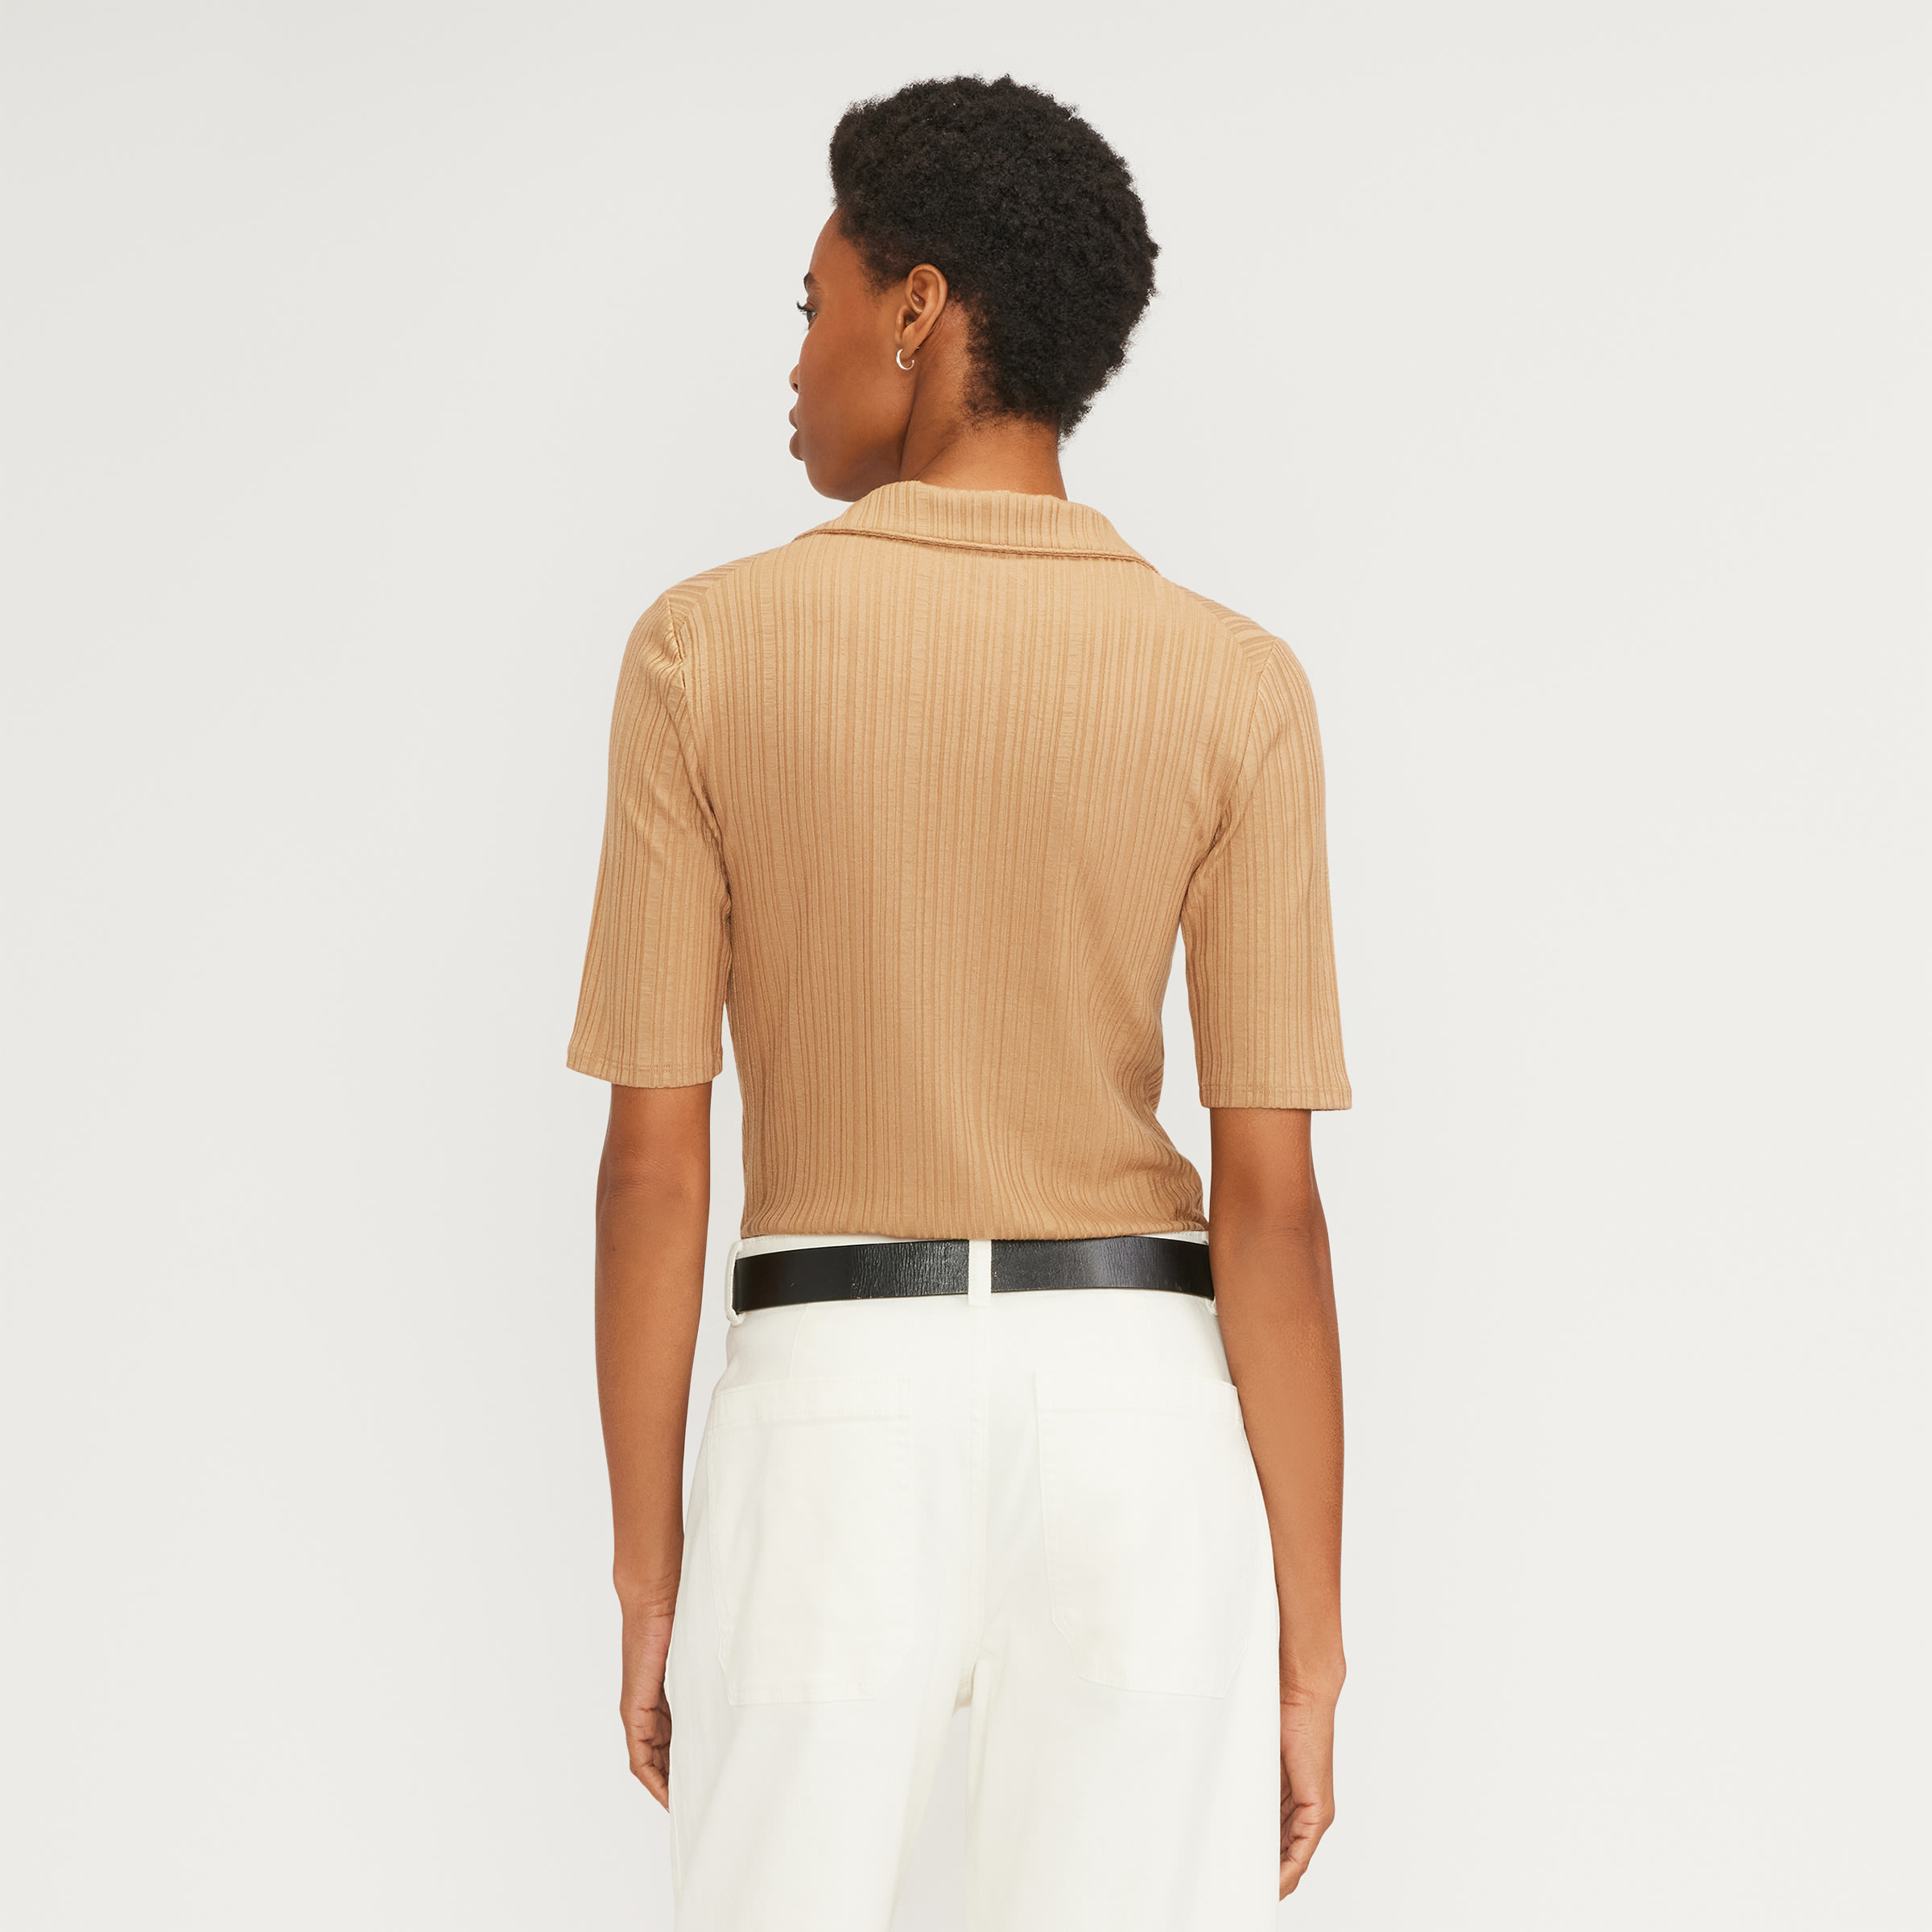 Everlane Women's Rib Soft Knit Open Collar Polo Shirt in Caramel, Size Extra Small